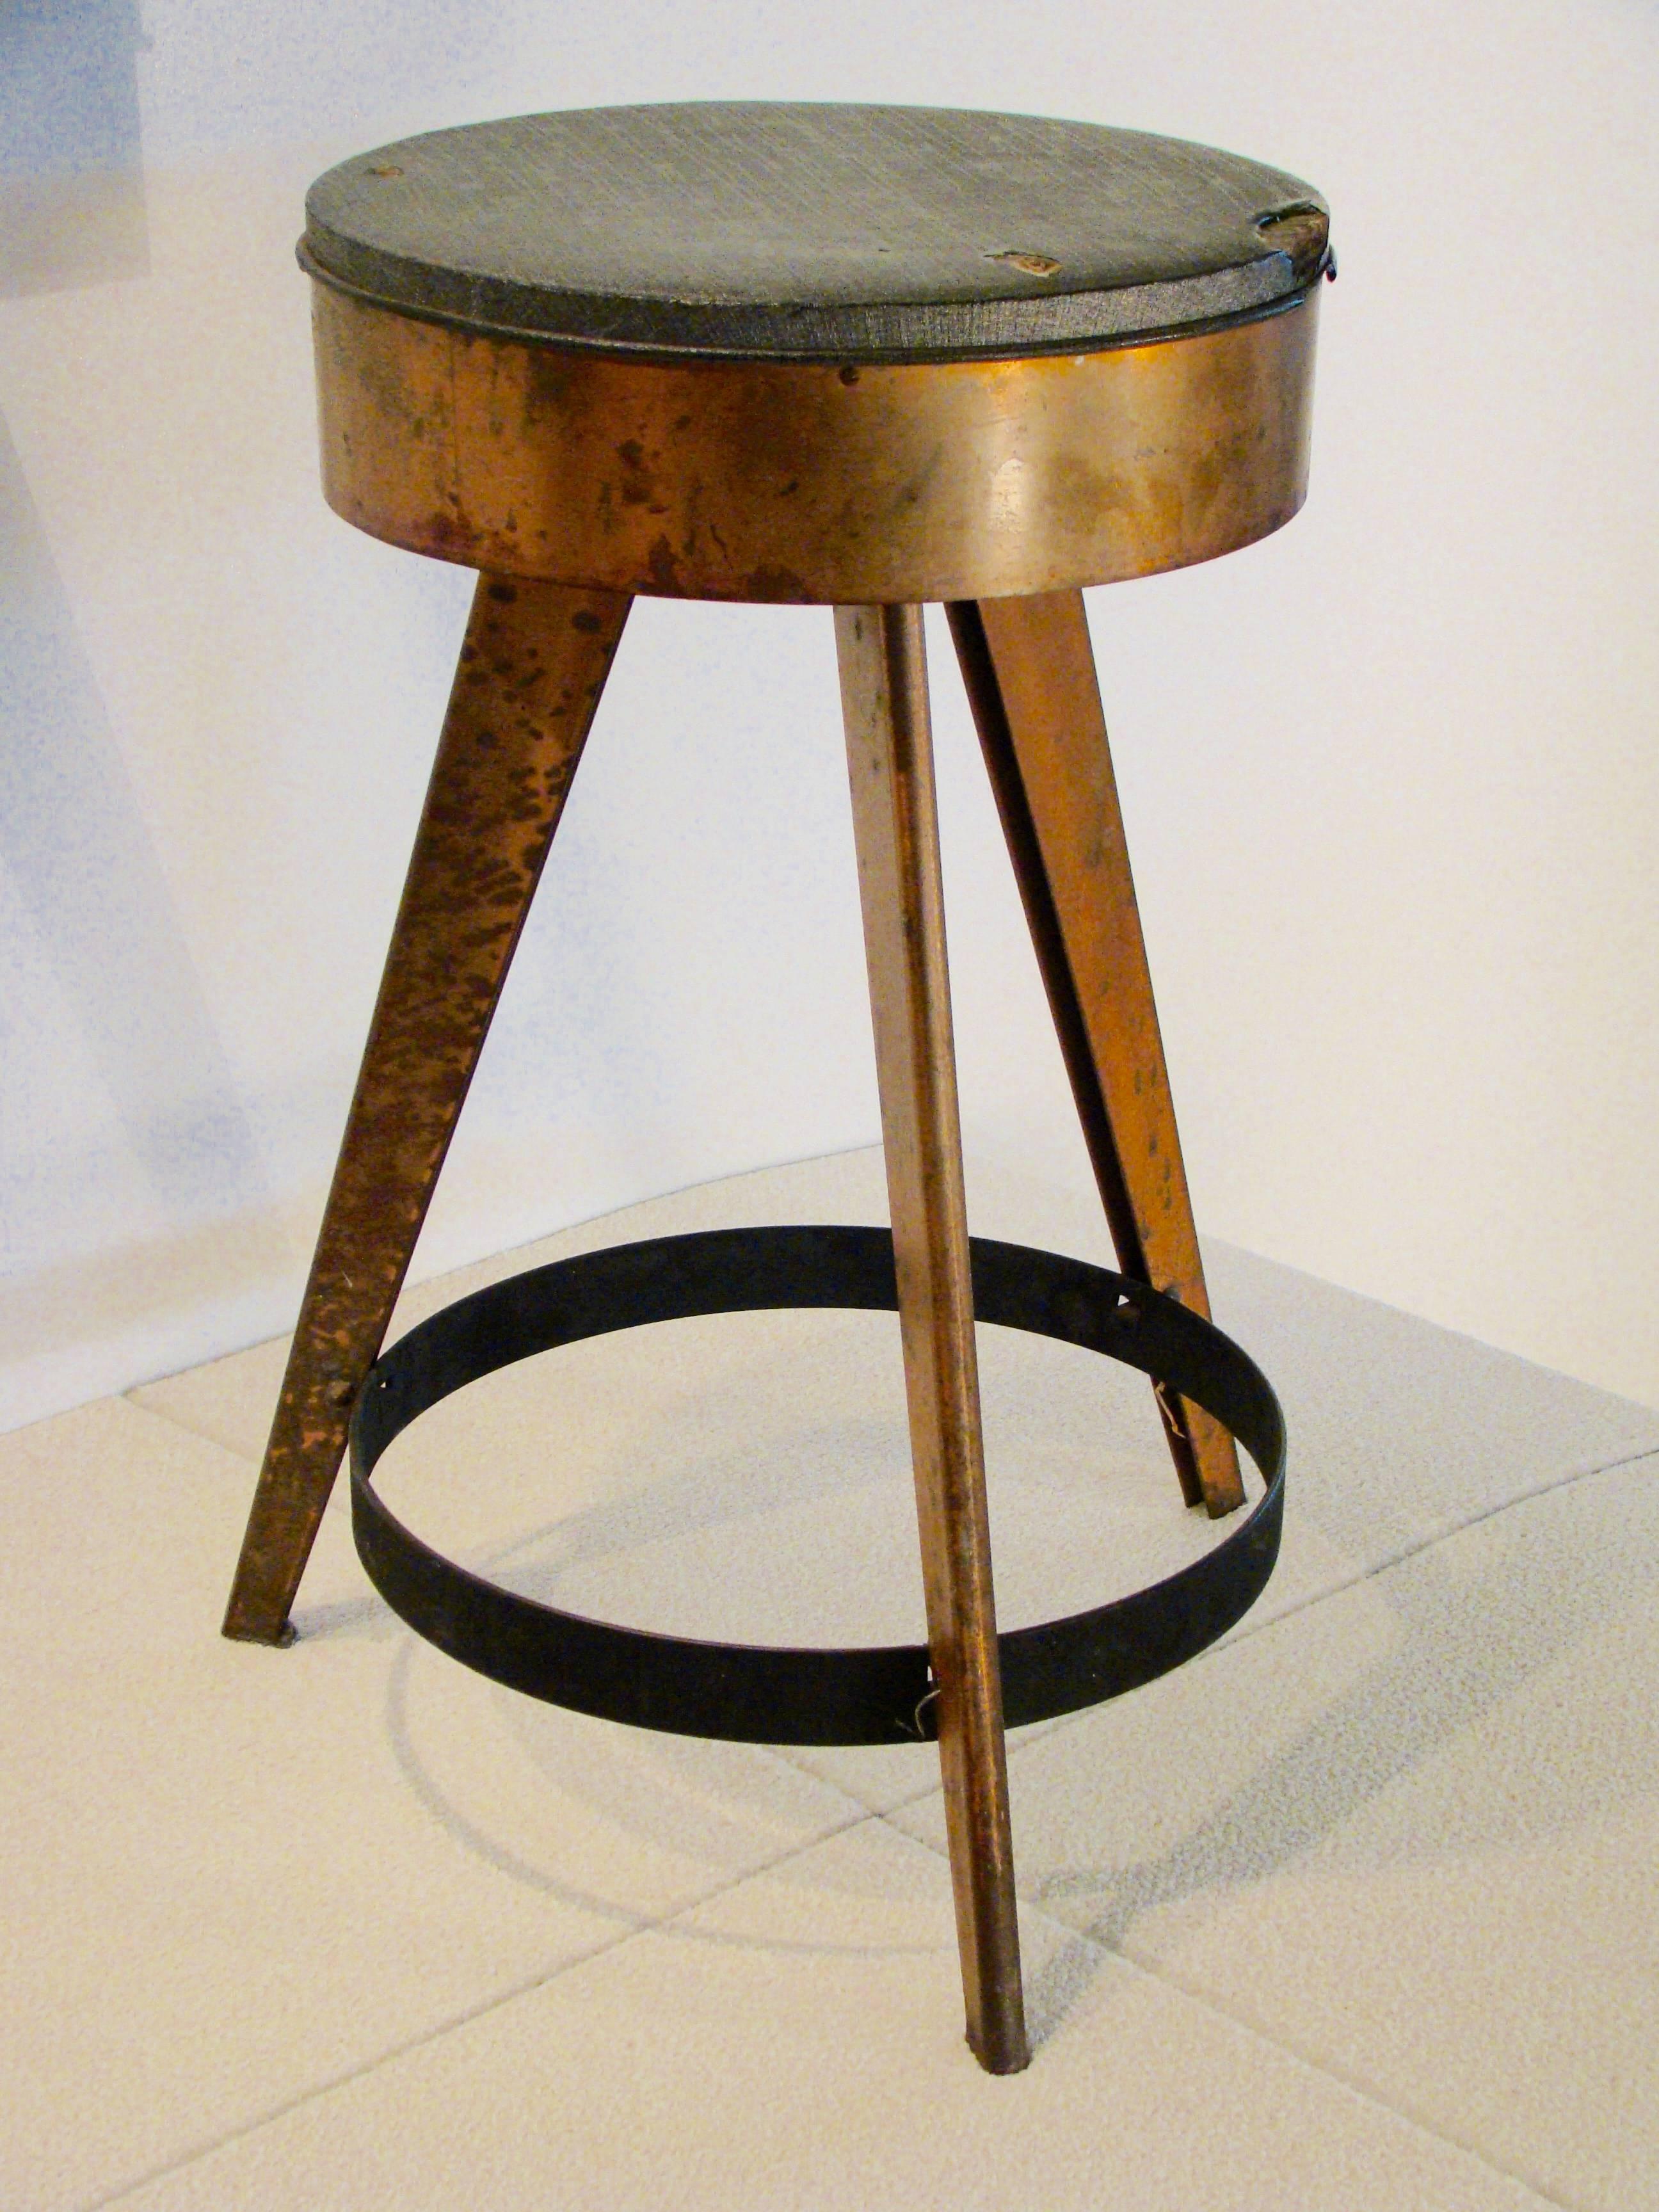 Unusual vintage counter-height stool. Vinyl seat, copper plated metal frame and legs, blackened steel foot ring. Nice patina.